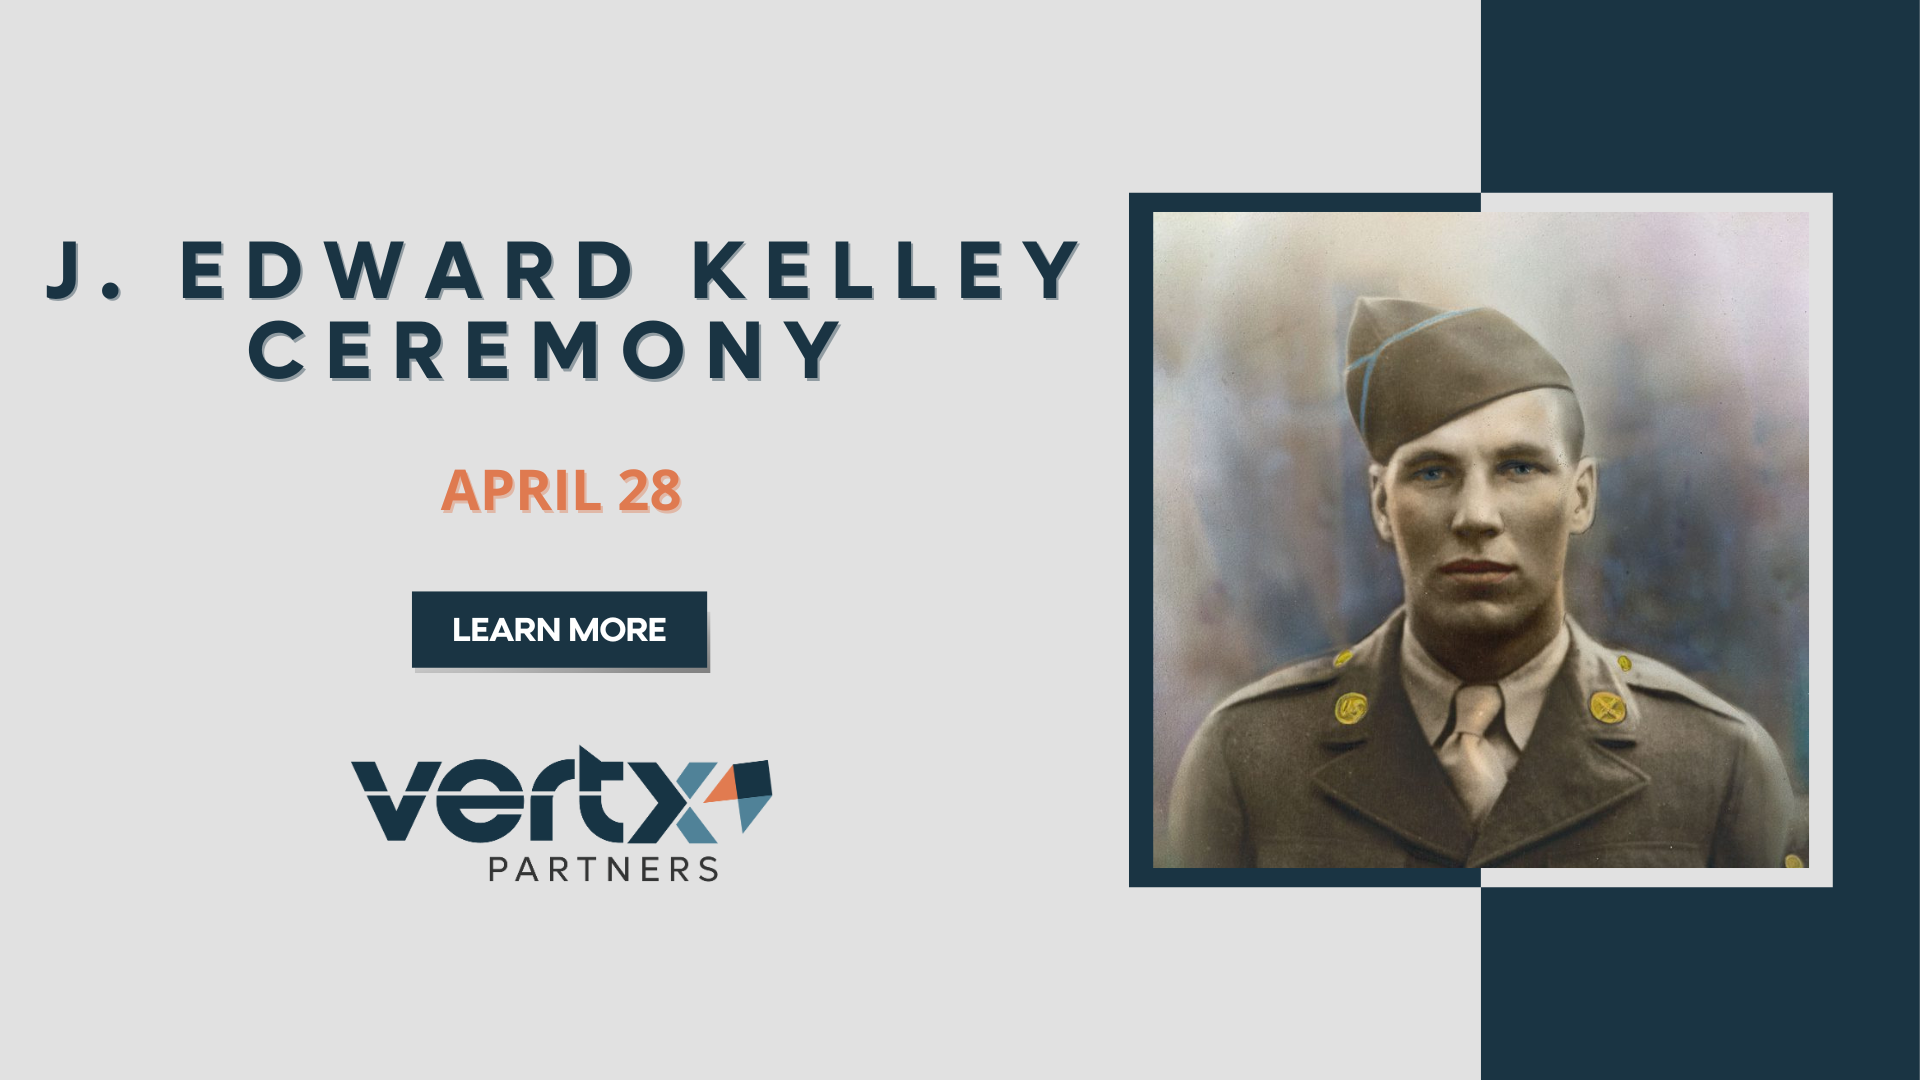 This graphic has the title J. Edward Kelley ceremony with the date april 28th below it. To the right of the title is a photo of J. Edward Kelley